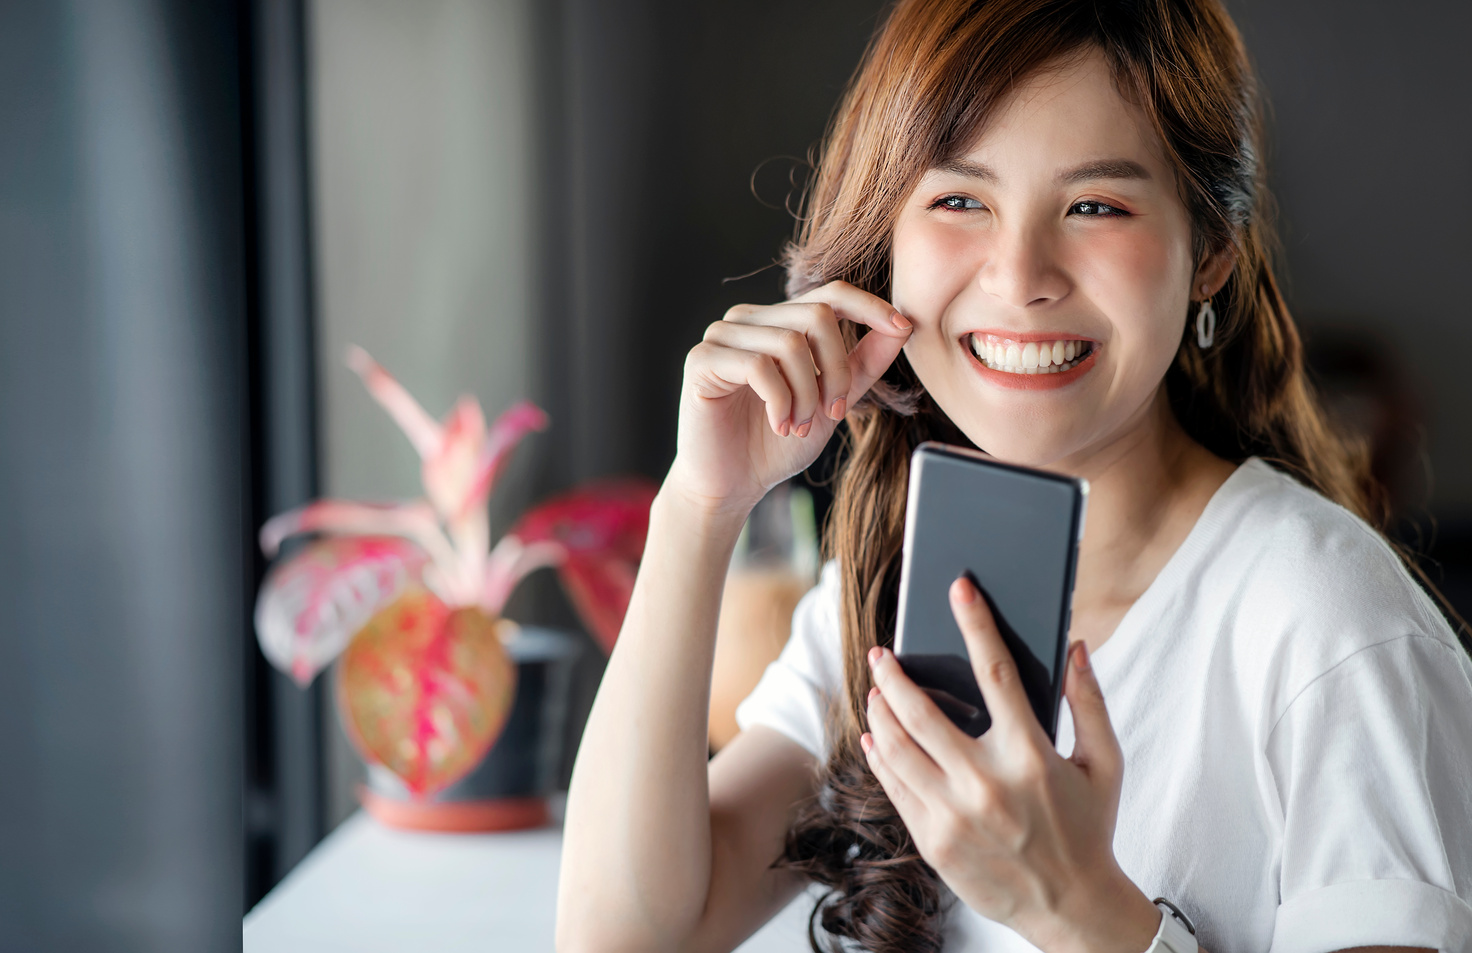 An Asian Woman Smiling Using Mobile Phone